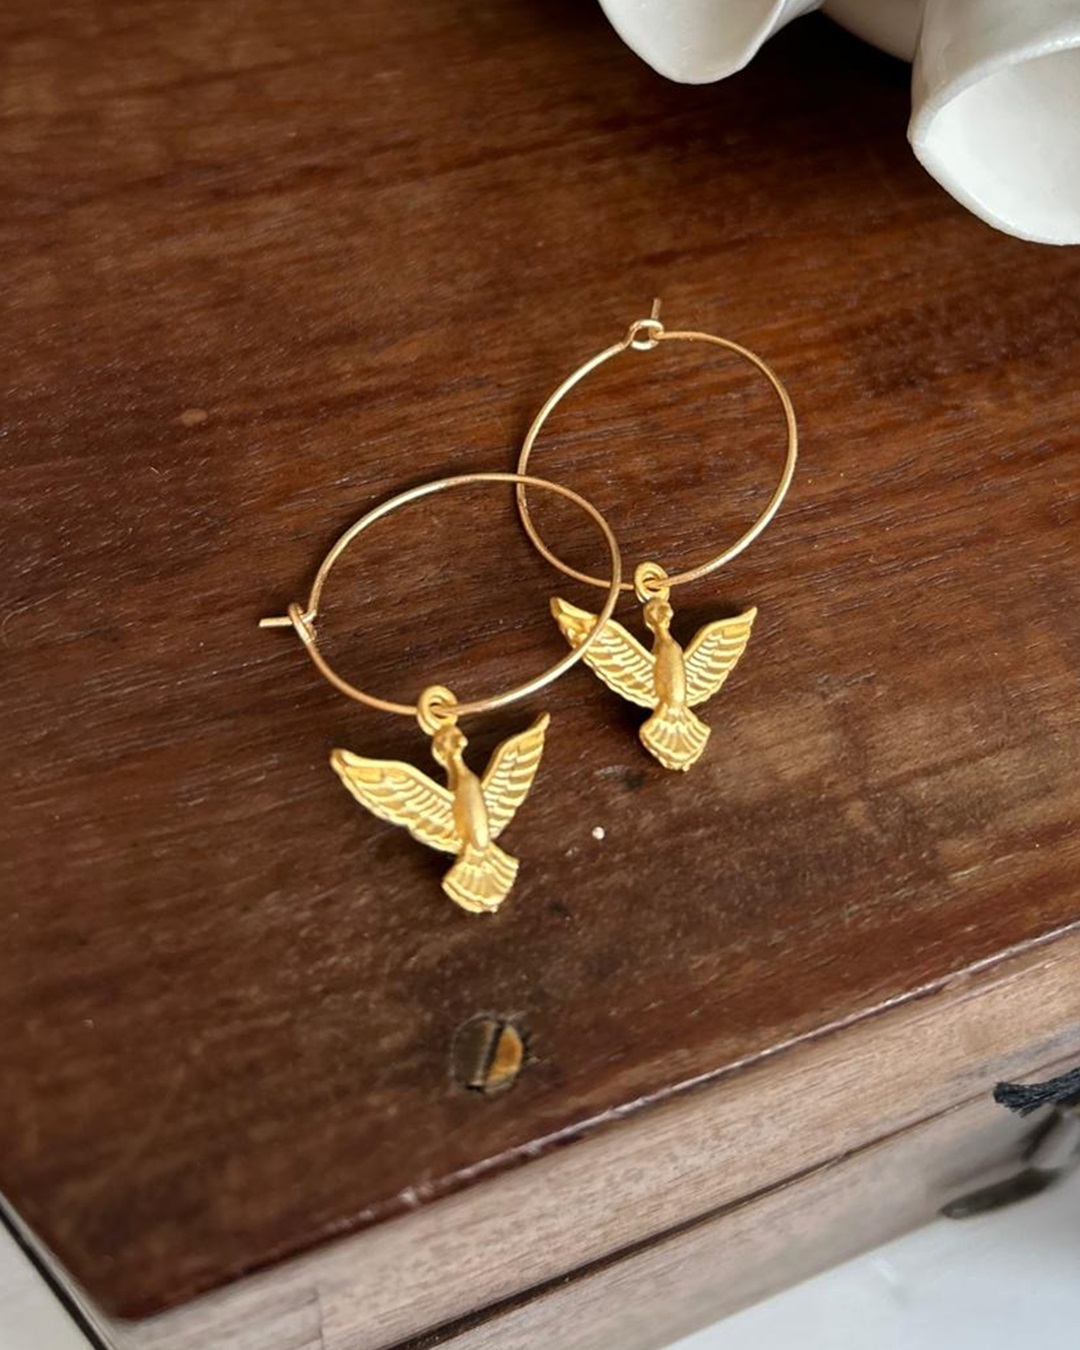 Gold hoop eearrings with gold bird charm on wooden bench